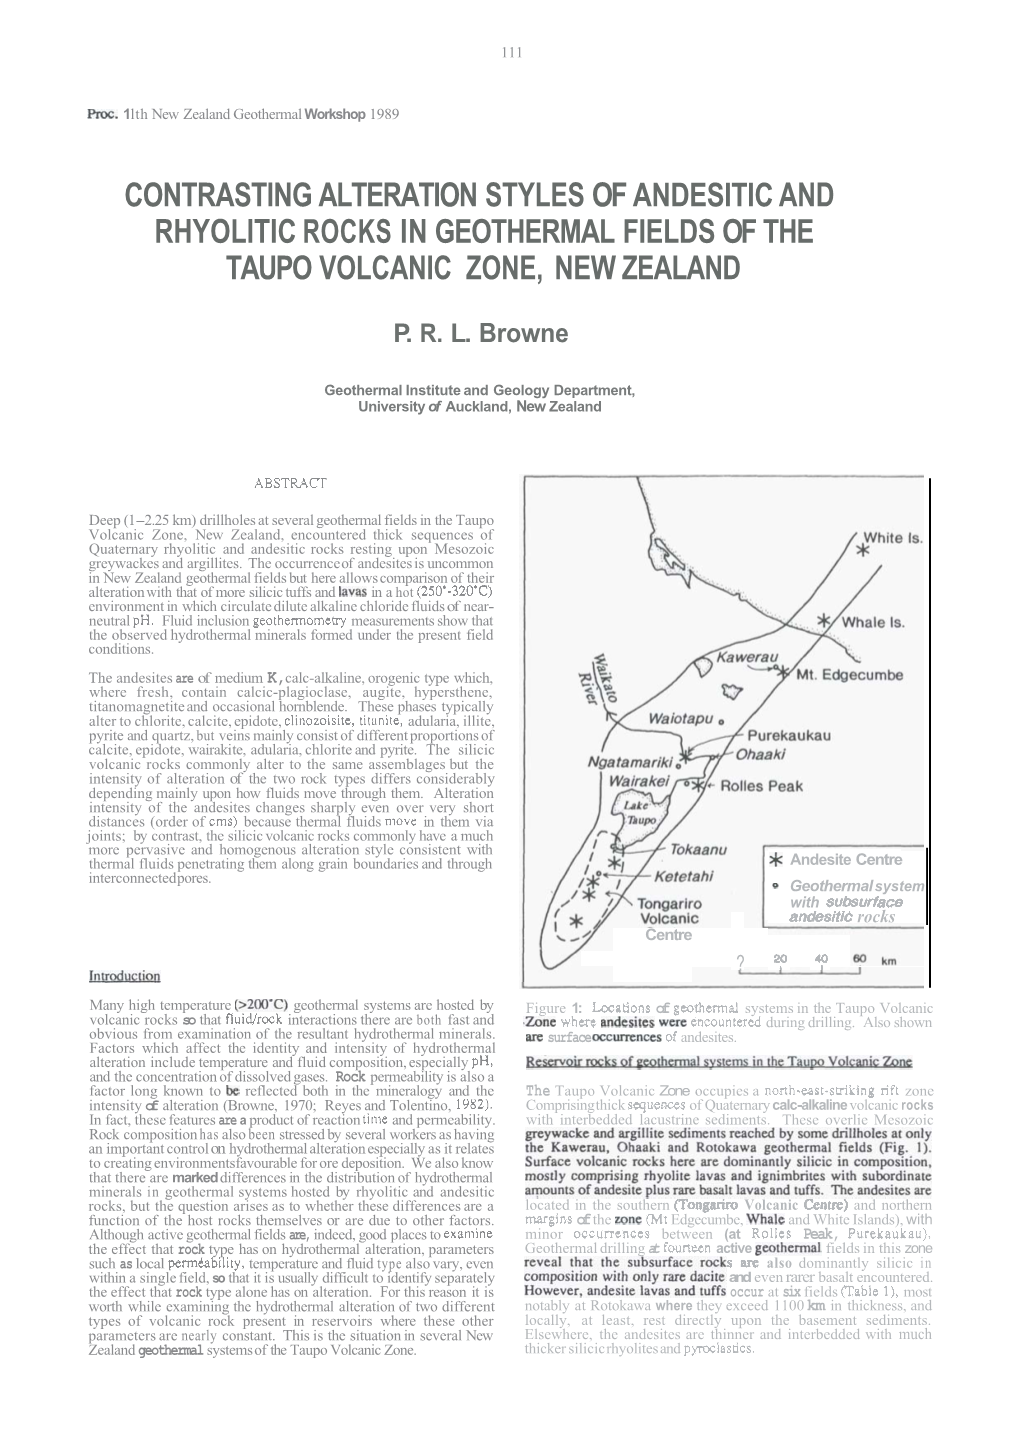 Contrasting Alteration Styles of Andesitic and Rhyolitic Rocks in Geothermal Fields of the Taupo Volcanic Zone, New Zealand